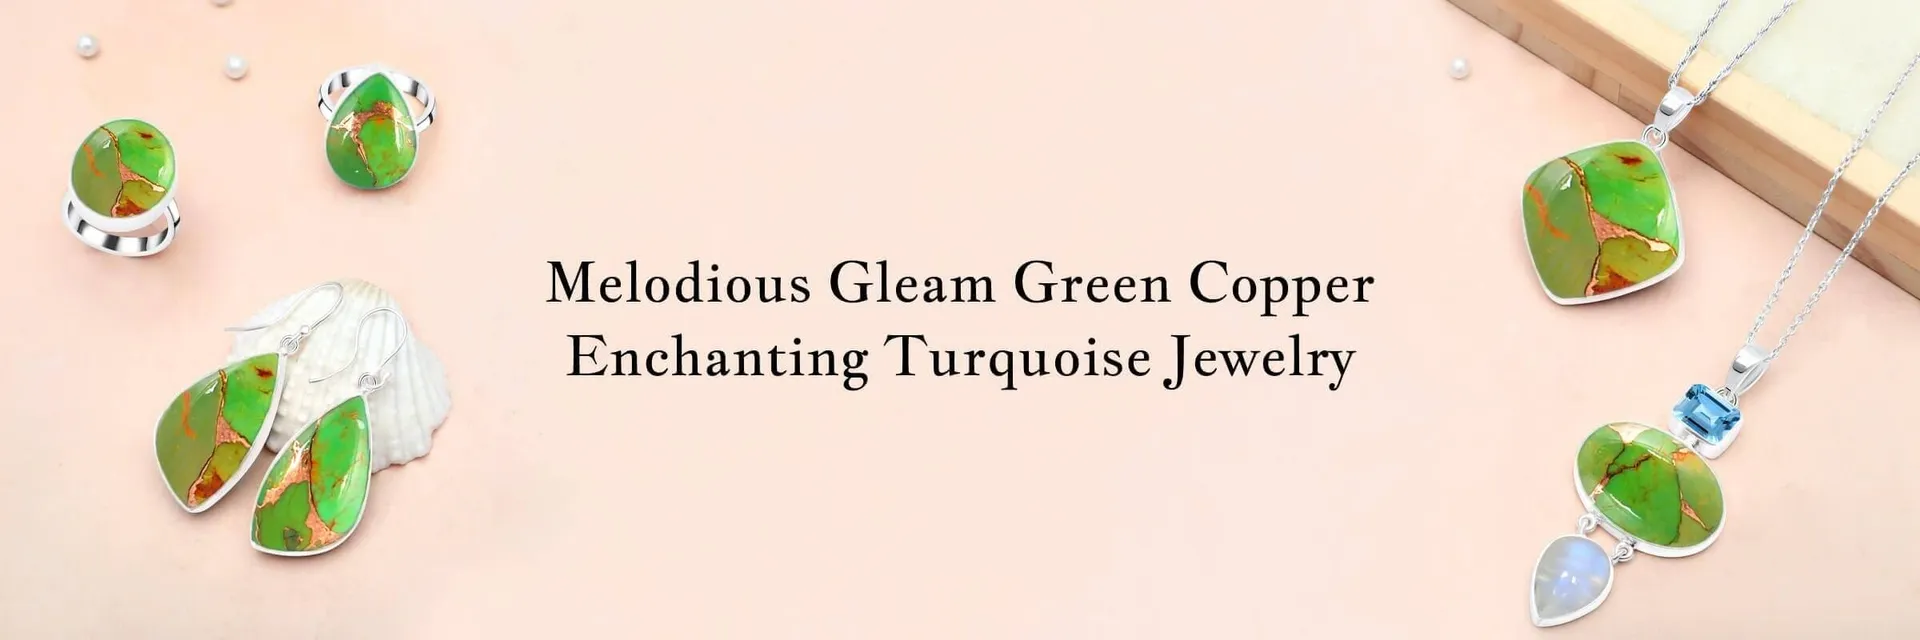 Whispering Gems: Delicate Green Copper Turquoise Jewelry for Subtle Glamour

Green Copper Turquoise is an authentic gemstone with a green shade and excellent sparkly work that resembles gold. The turquoise charm is made more appealing by crumbling and reforming when copper is put to it, which is a member of the turquoise family. The Delicate Green Copper Turquoise jewelry is covered in copper deposits, and its lovely curves on the surface display a dark brown and black matrix. 
Visit now :- https://www.rananjayexports.com/blog/green_copper_turquoise_jewelry_for_subtle_glamour